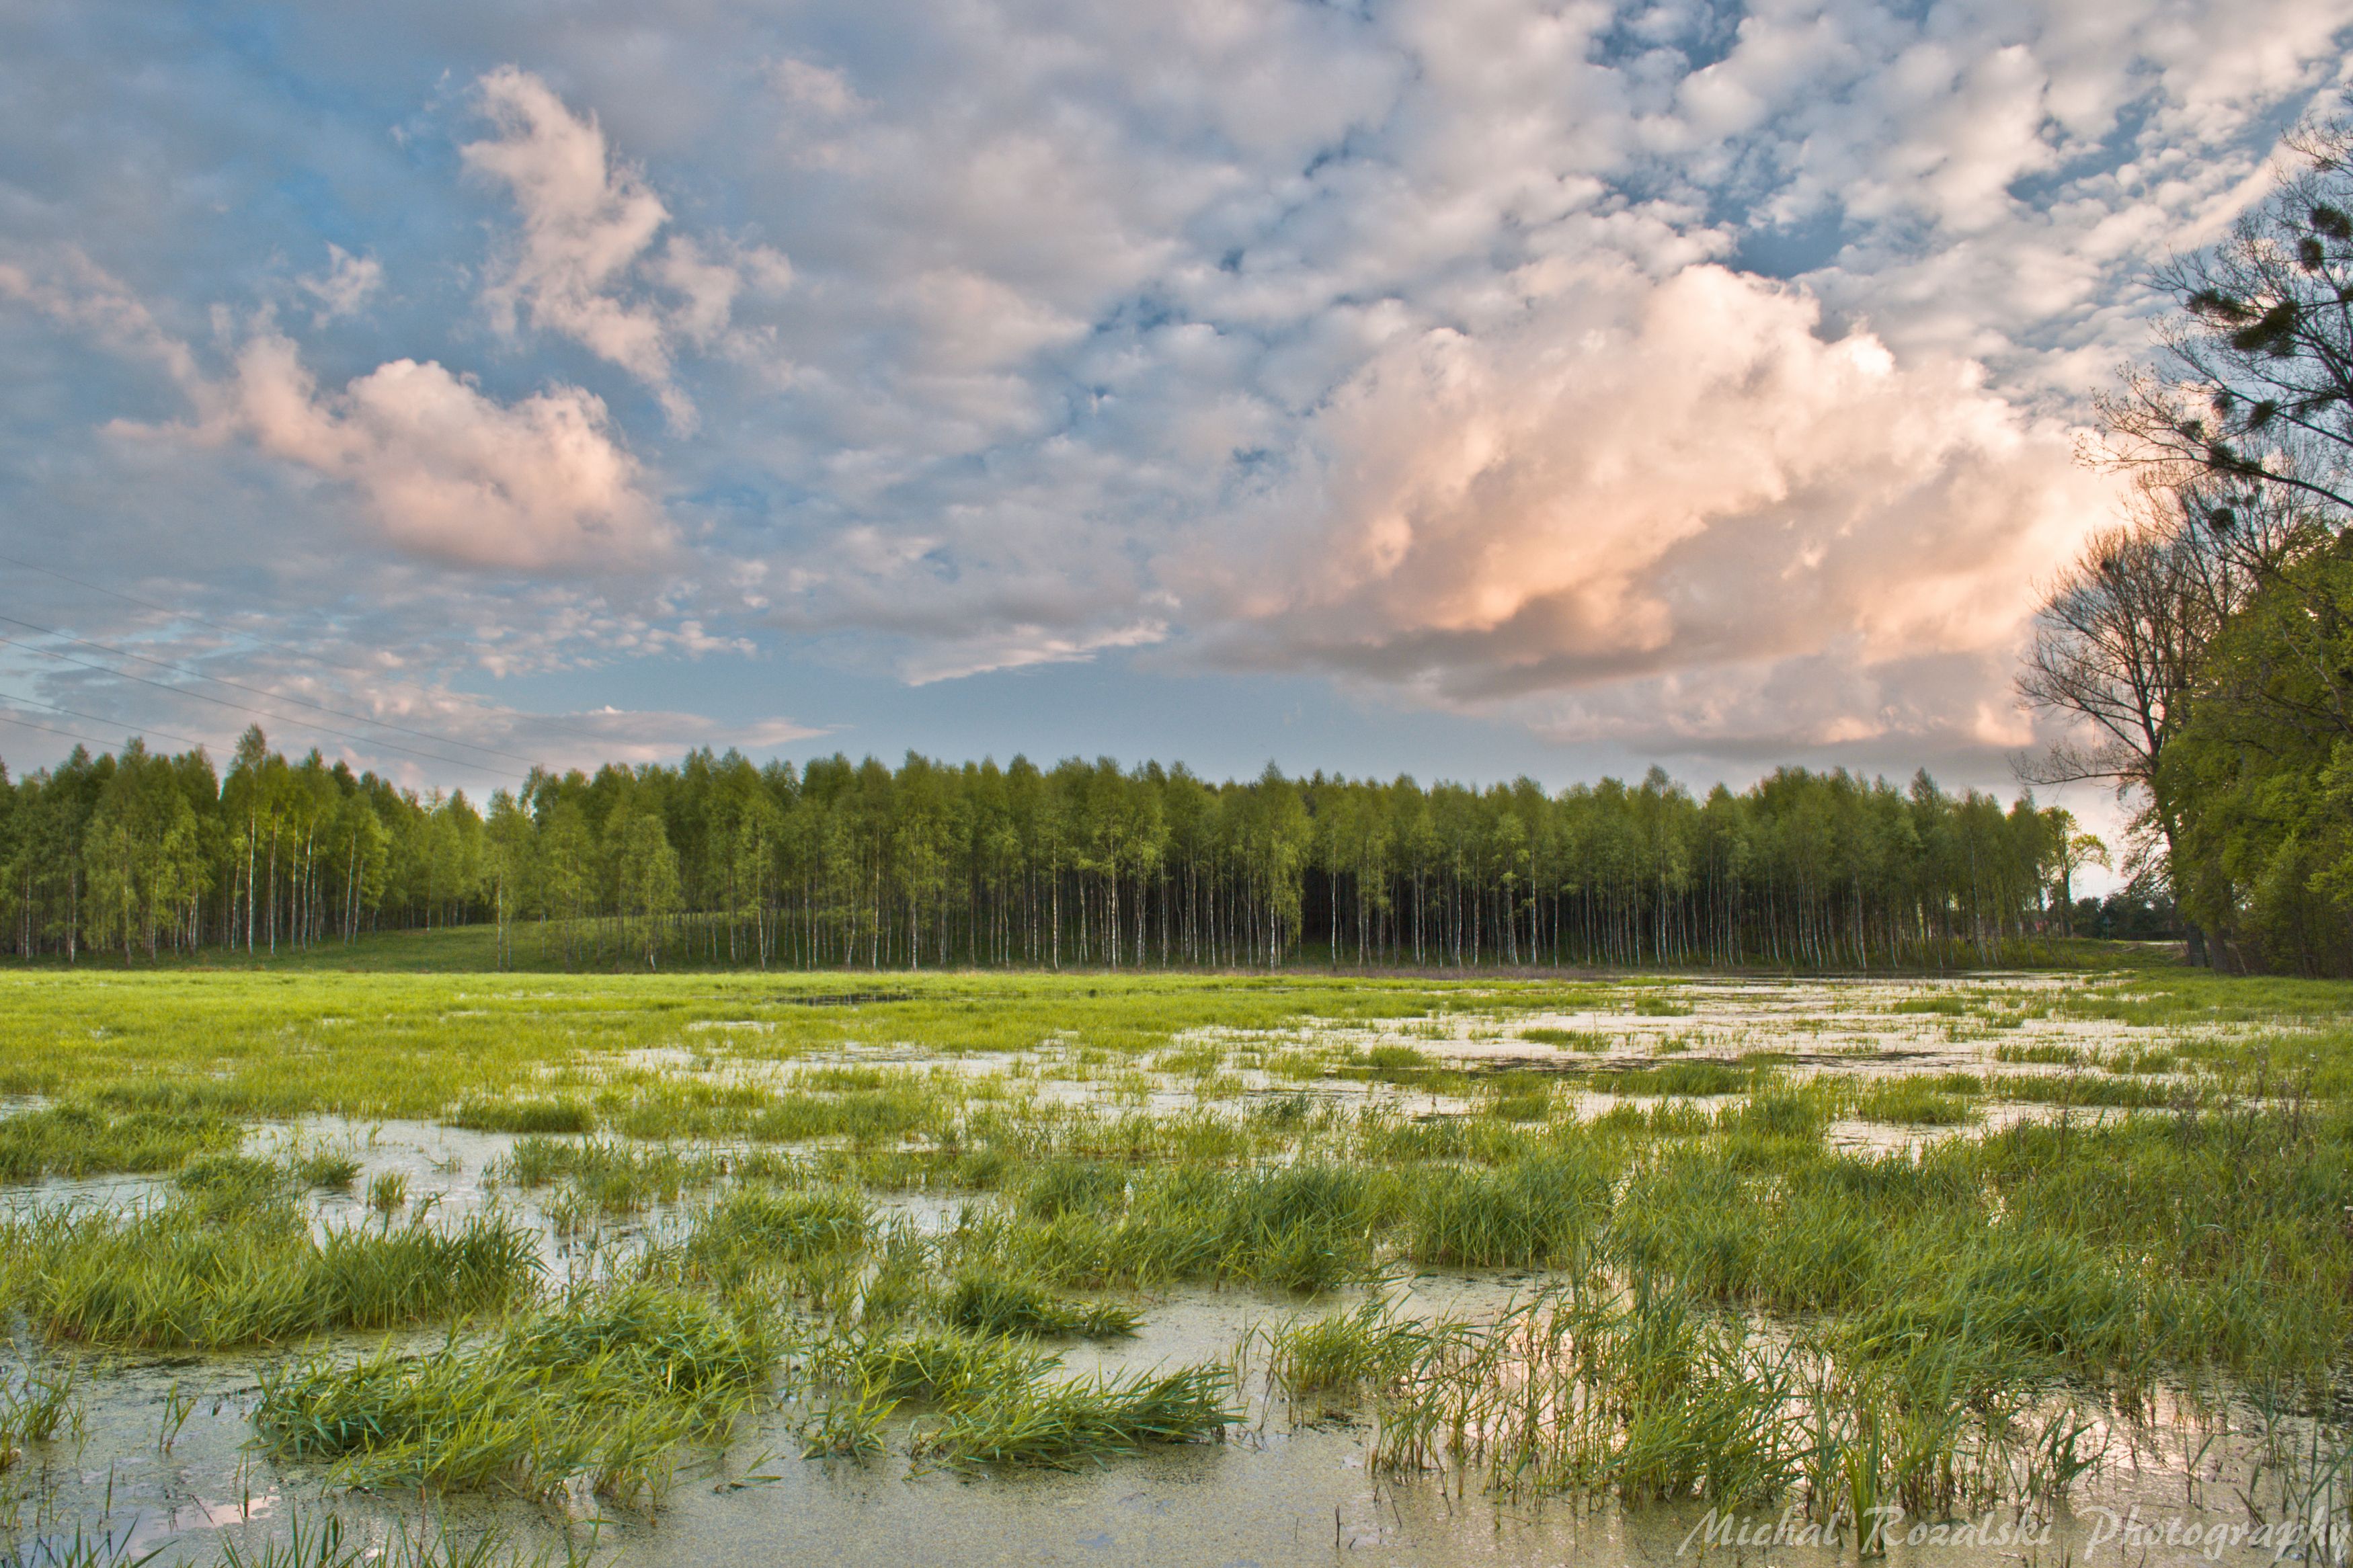 spring, ,season, ,swamps, ,water, ,trees, ,forest, ,clouds, ,sky, ,green, ,sunset, ,, Michal Rozalski